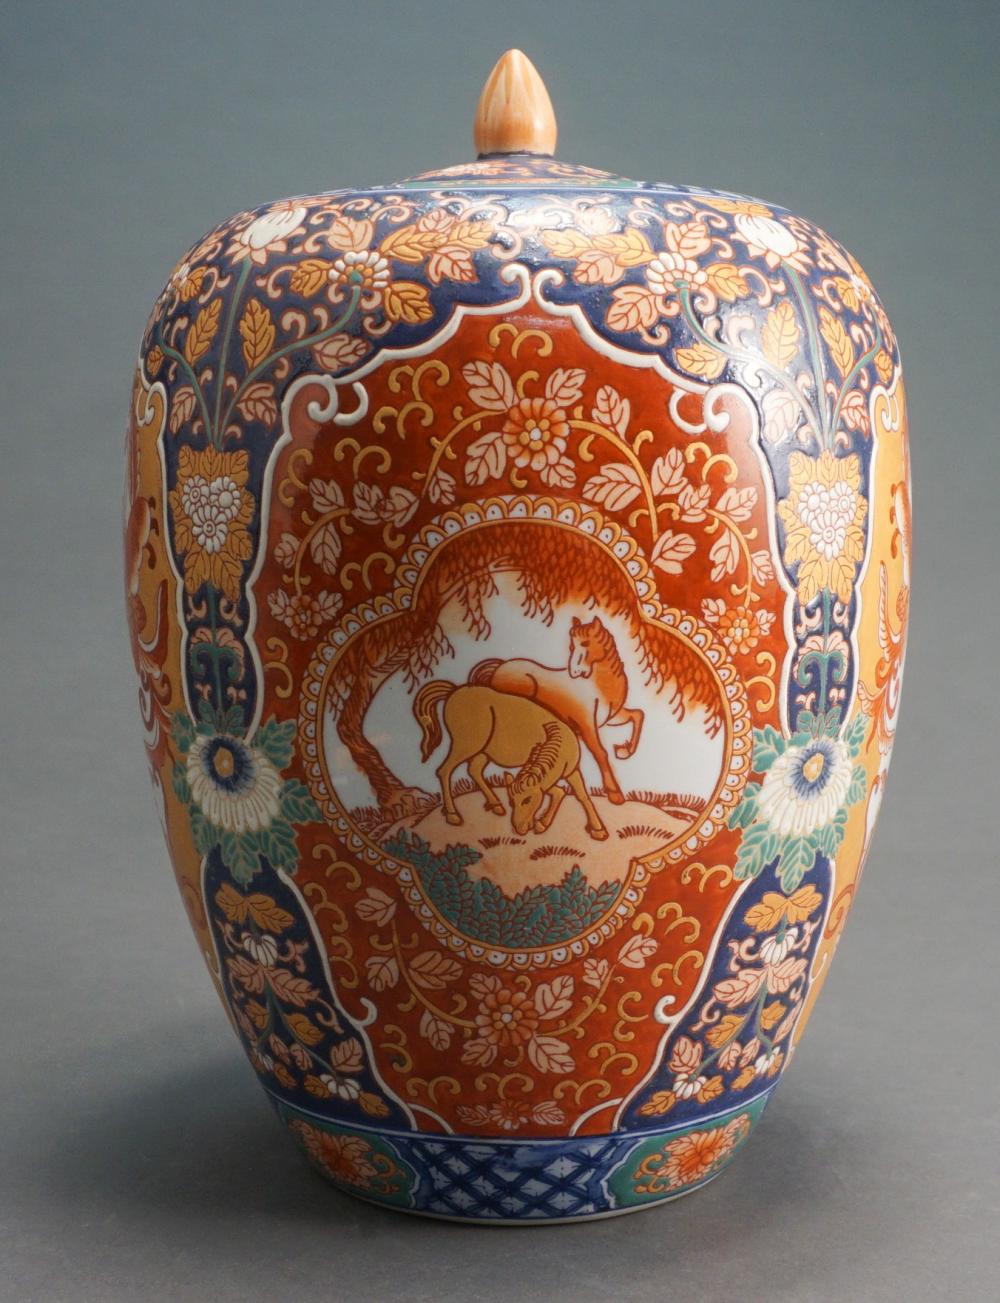 SOUTHEAST ASIAN POLYCHROME DECORATED